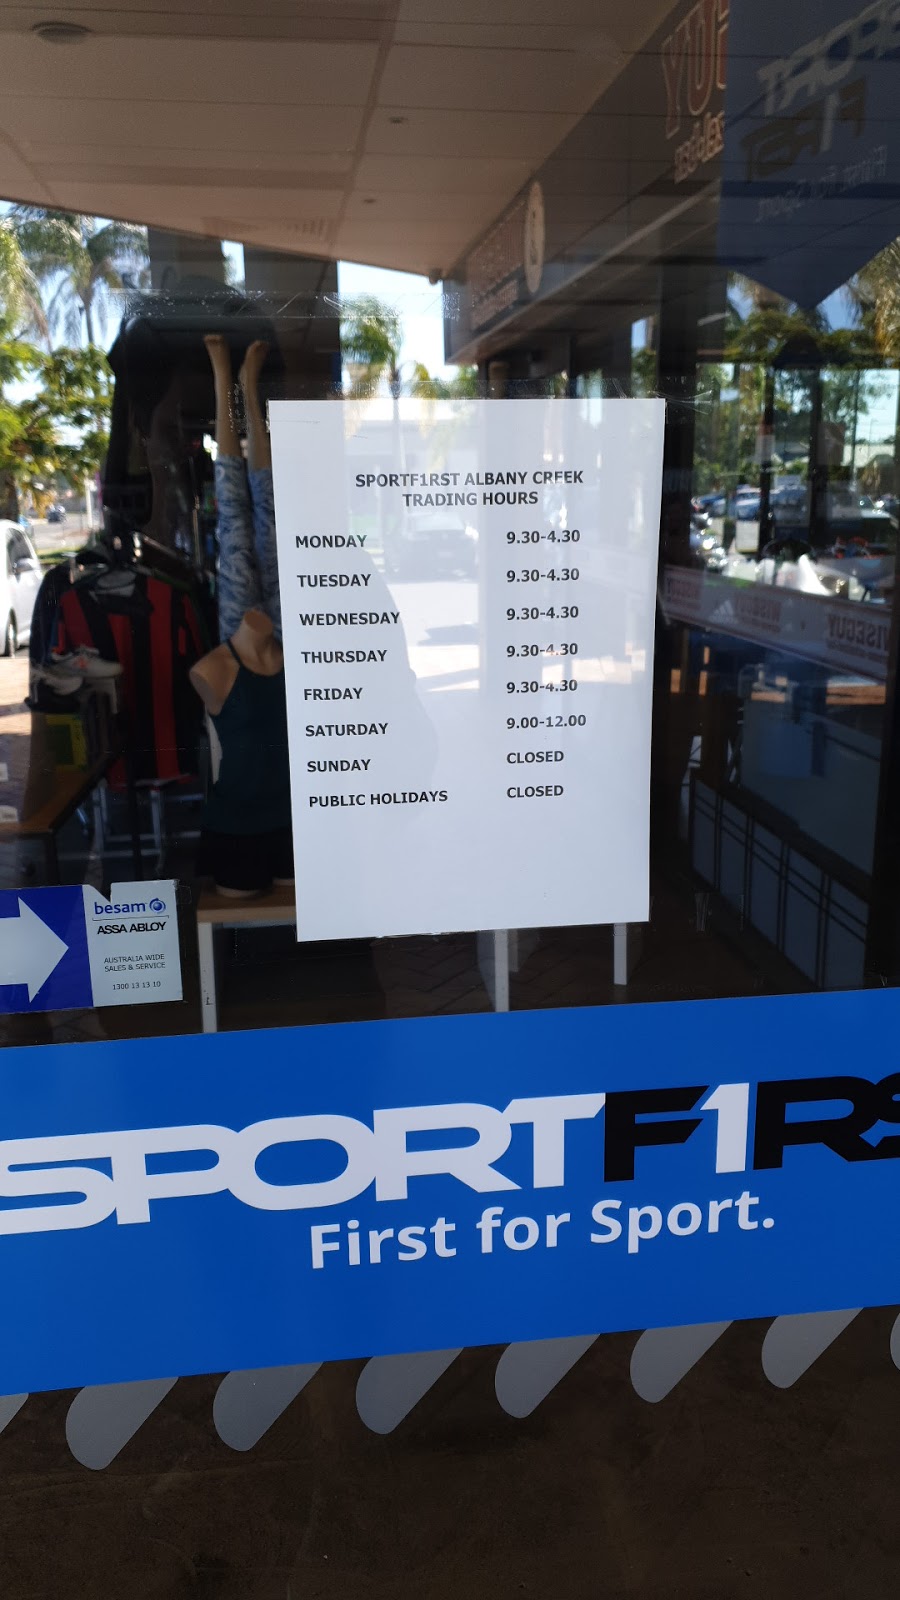 SPORTFIRST Albany Creek (720 Albany Creek Rd) Opening Hours